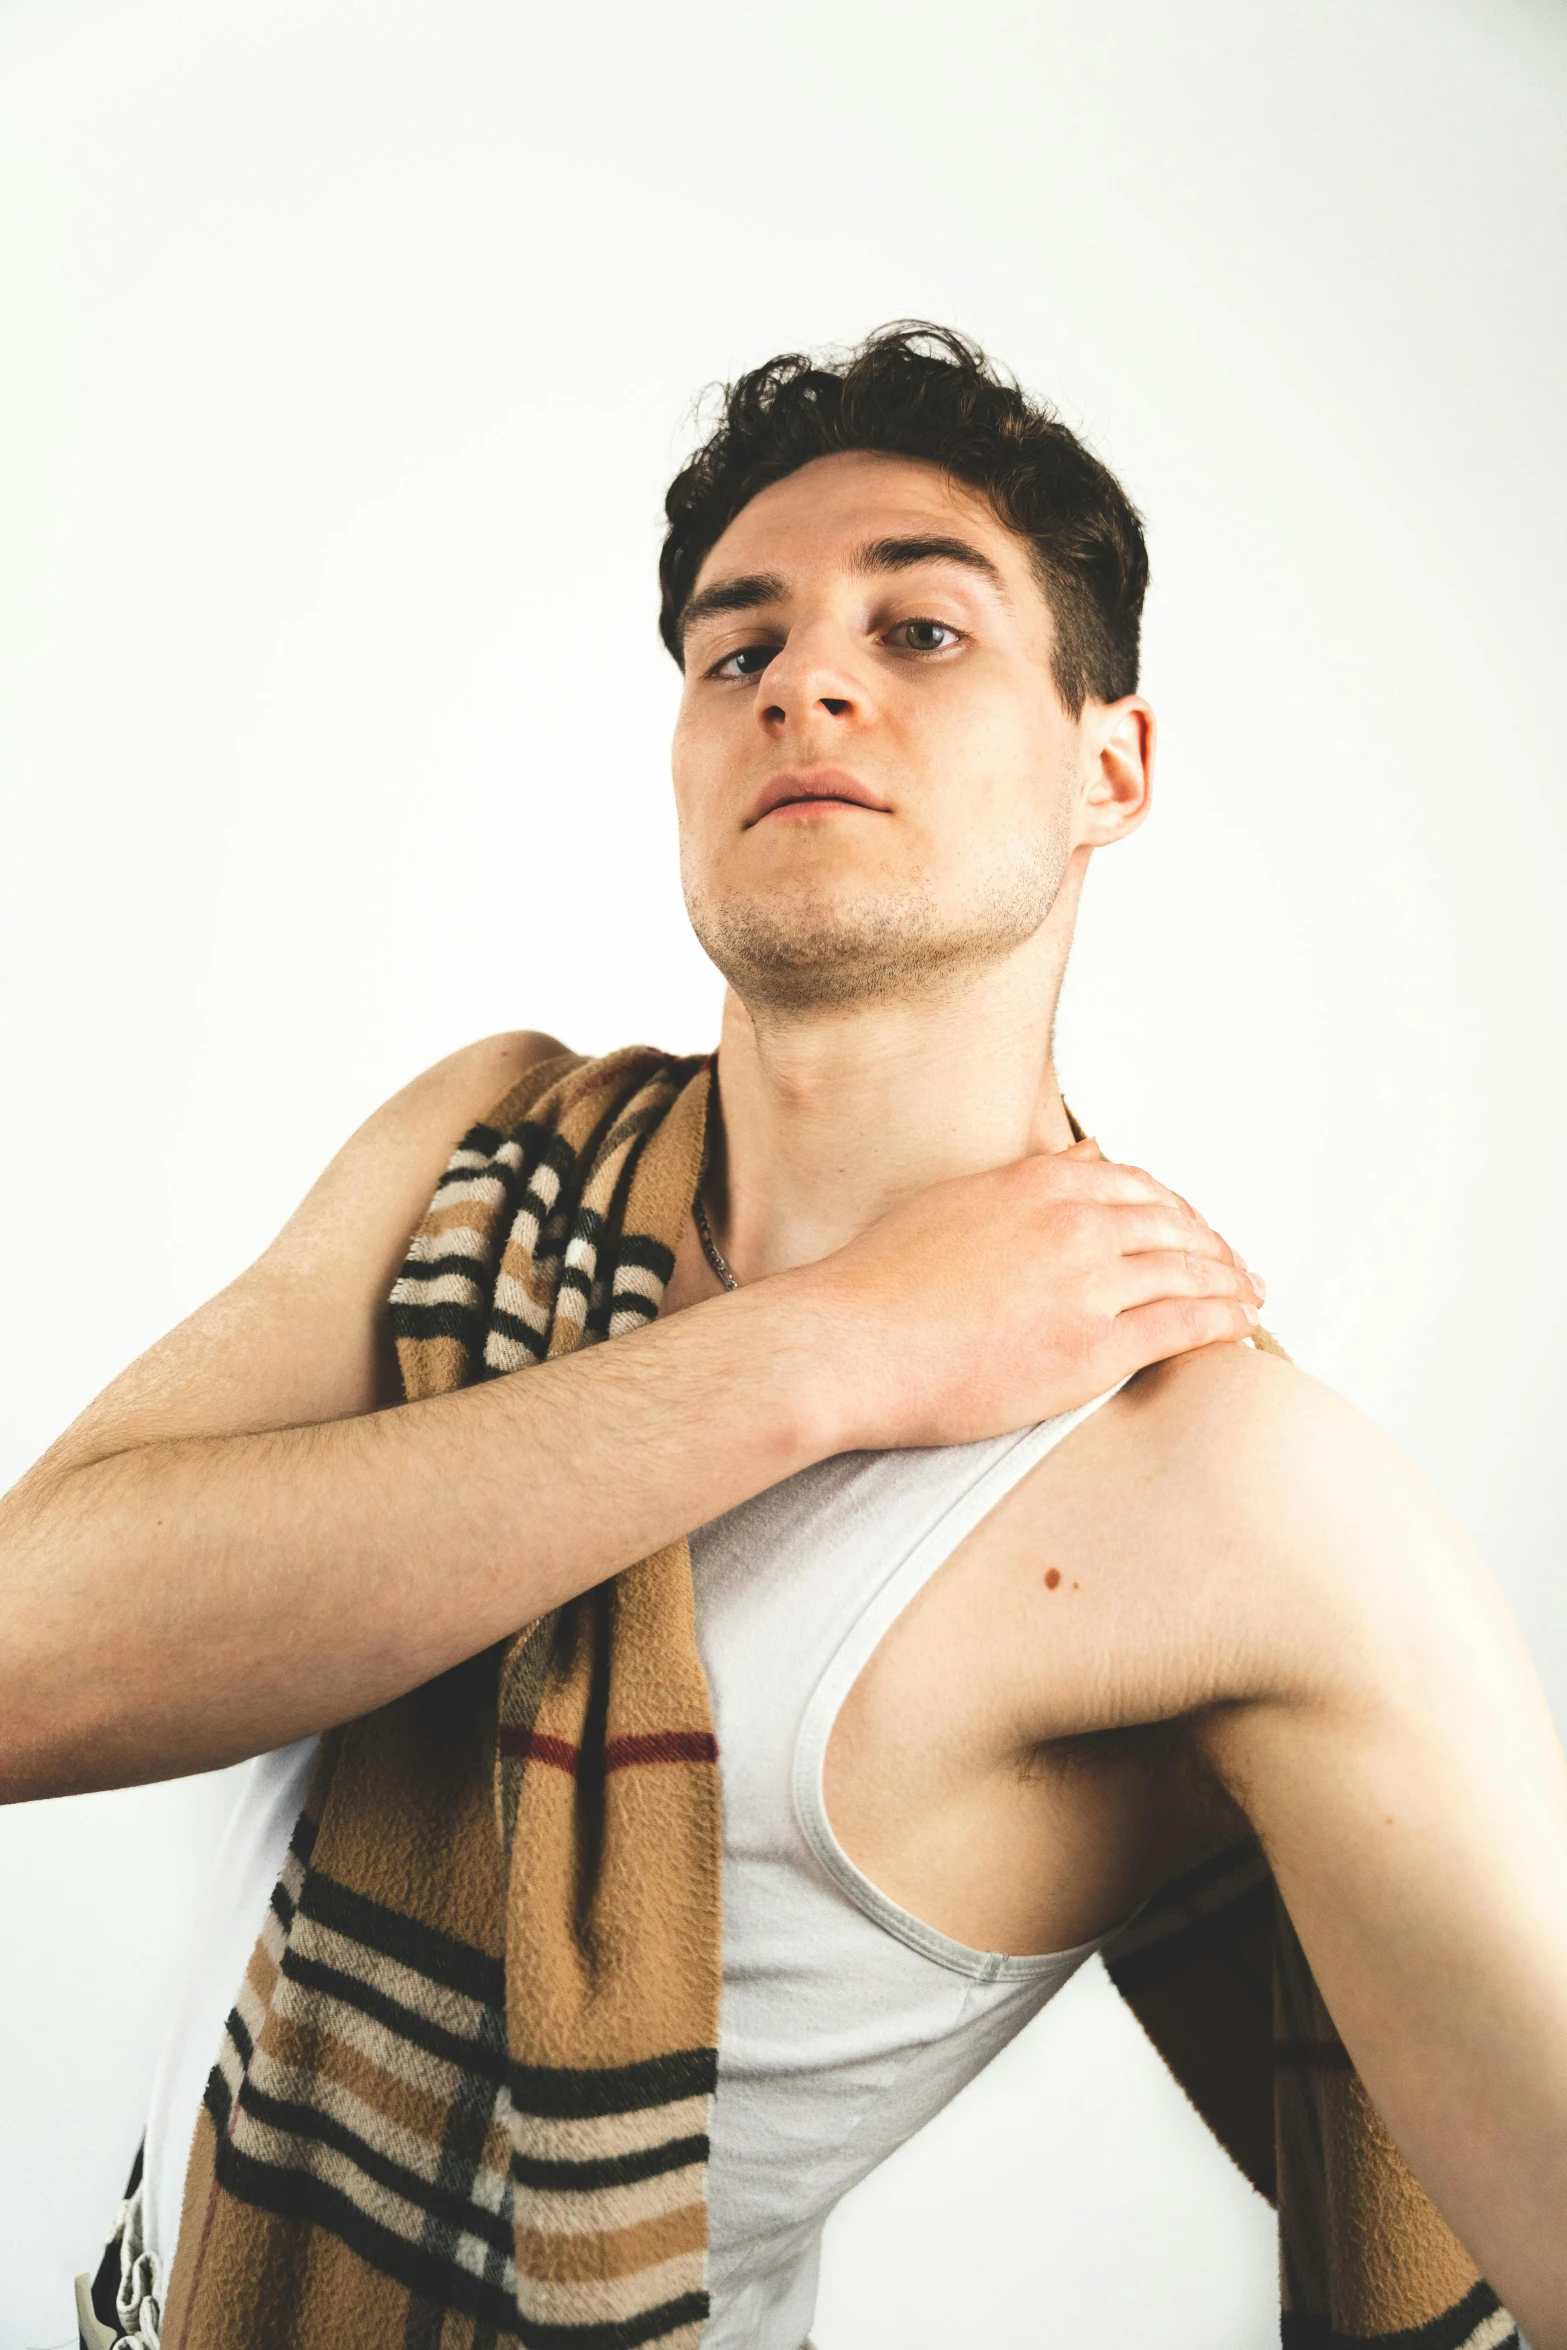 a young man in a tank top posing for a portrait